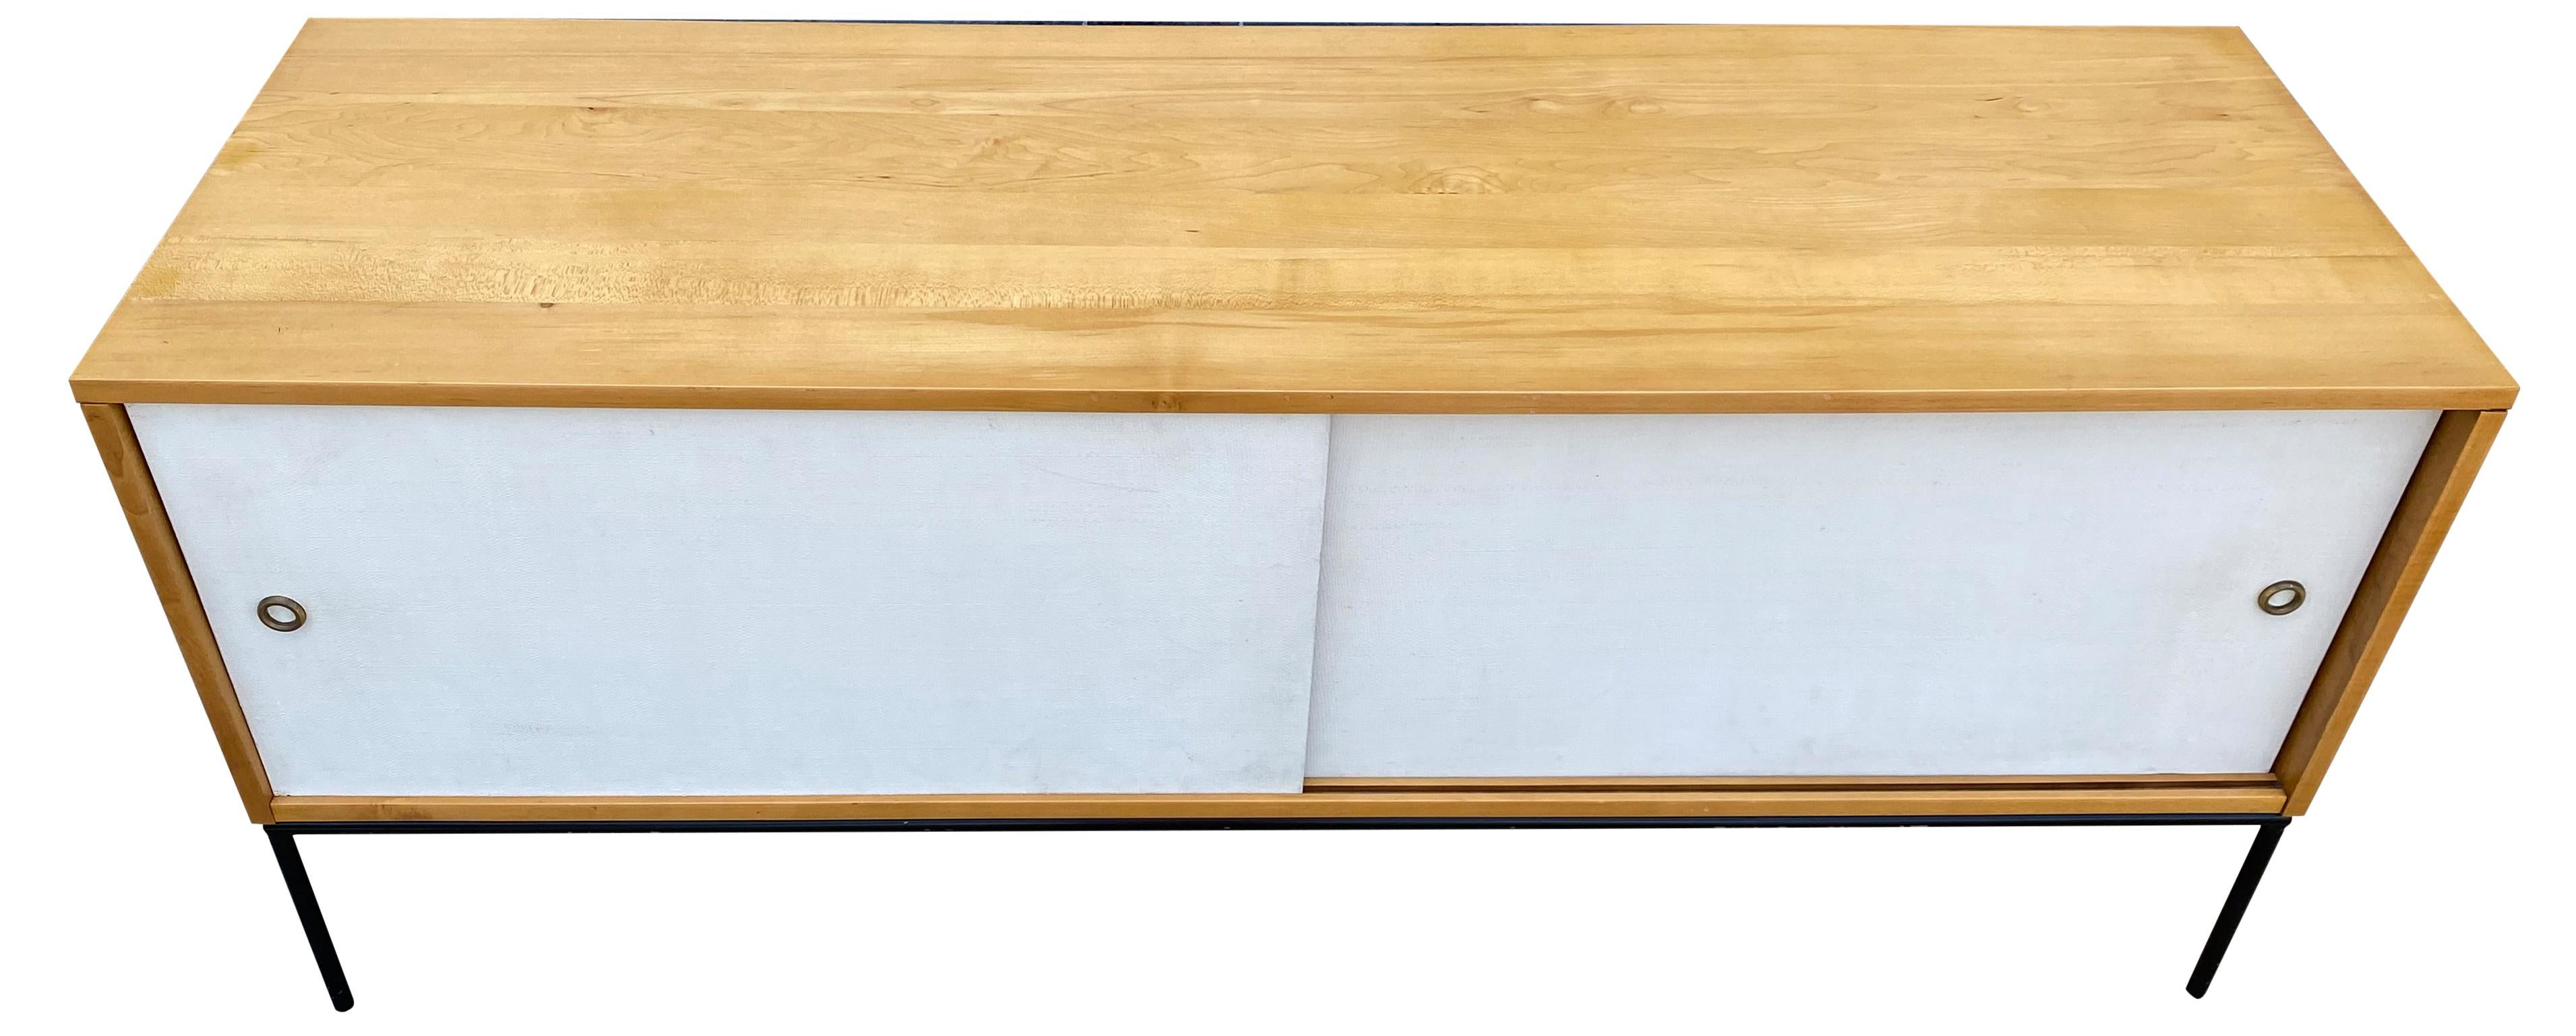 Beautiful midcentury low credenza by Paul McCobb circa 1950 planner group #1513 has 2 adjustable shelves with pins - solid maple construction has a Beautiful Blonde finish. All original white cloth sliding front doors with brass finger pull sits on